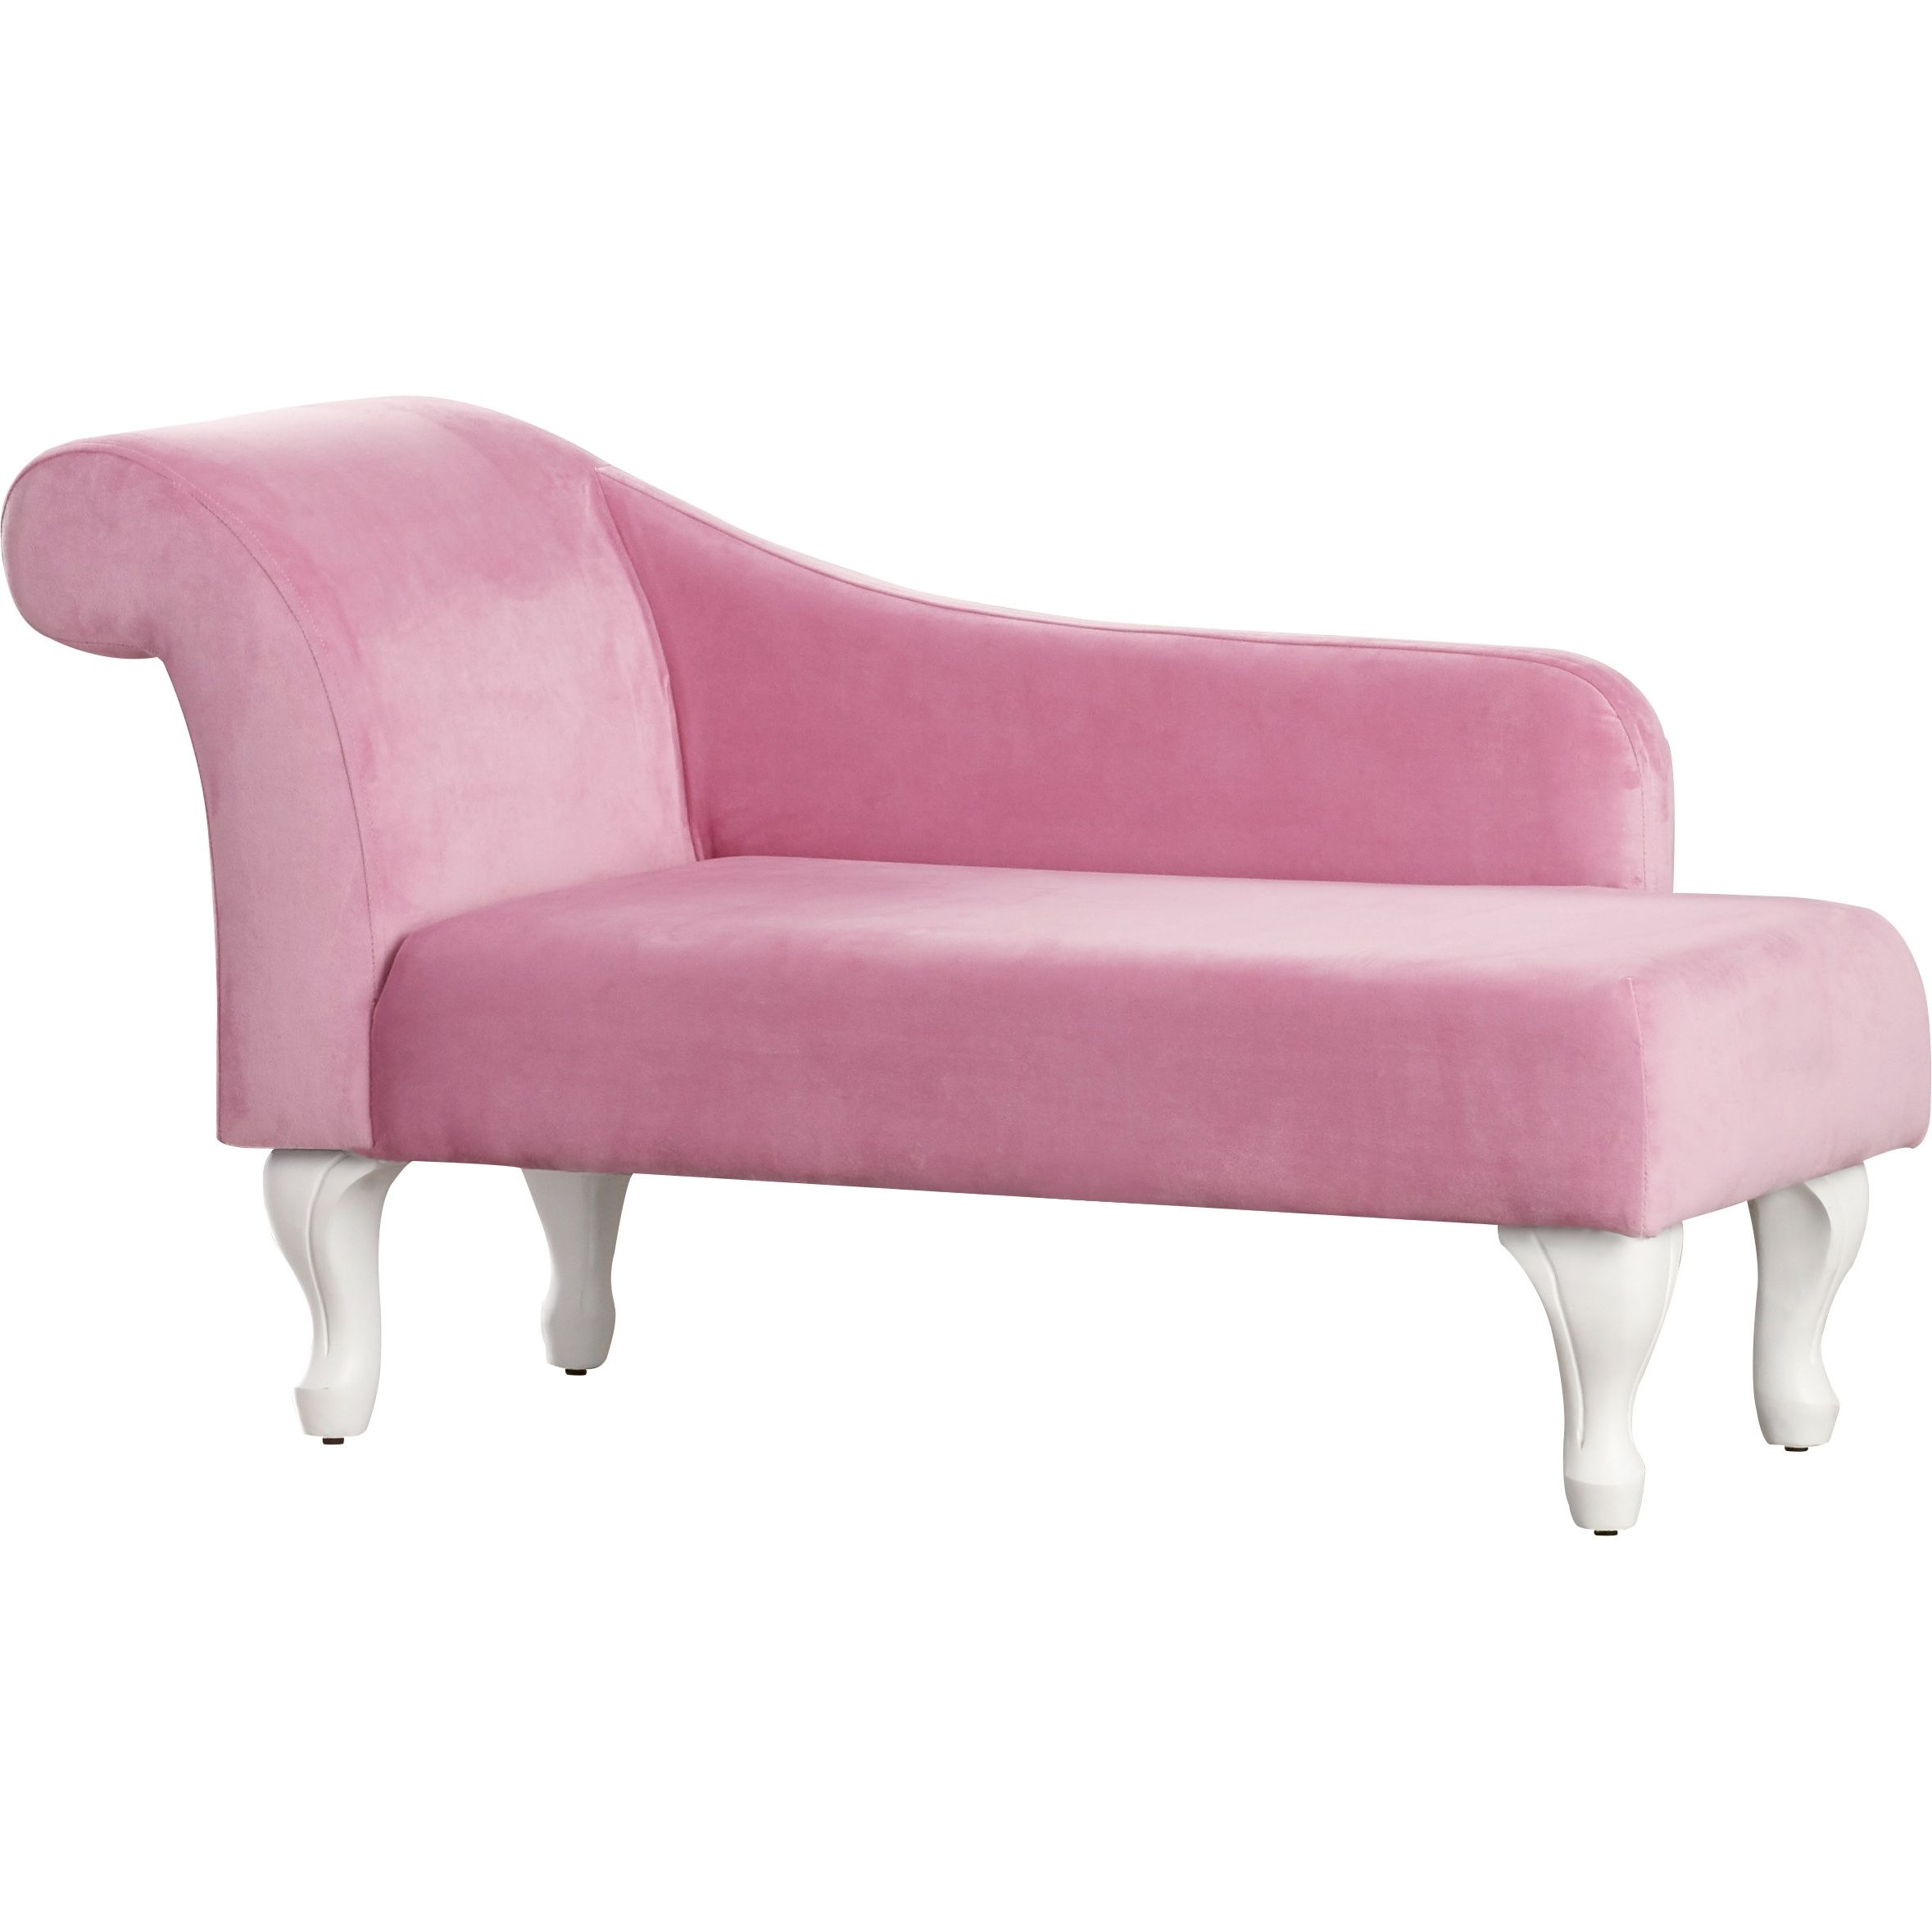 Most Recently Released Decor Of Pink Chaise Lounge With Viv Rae Leslie Kids Chaise Lounge Intended For Kids Chaise Lounges (View 10 of 15)